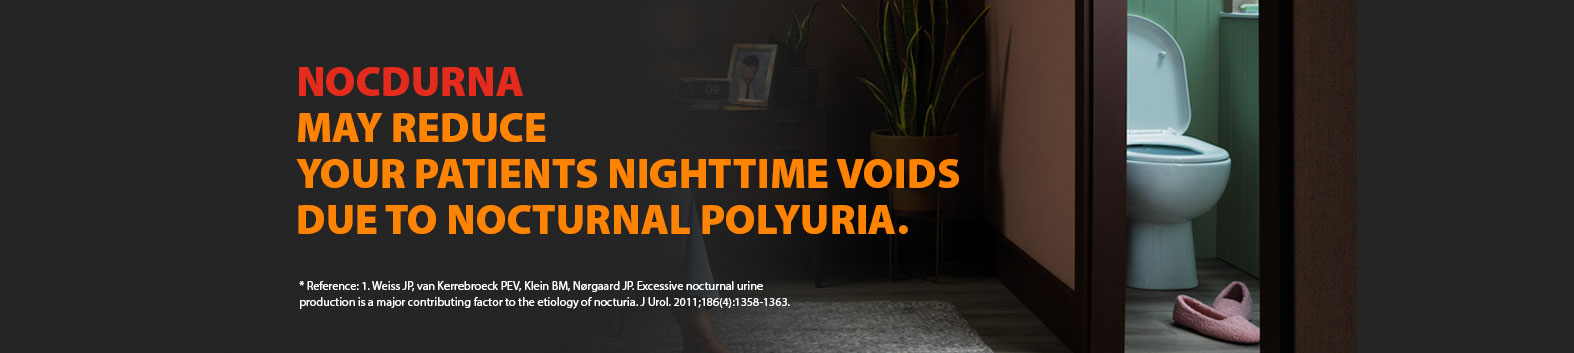 Nocdurna May Reduce Your Patients Nighttime Voids